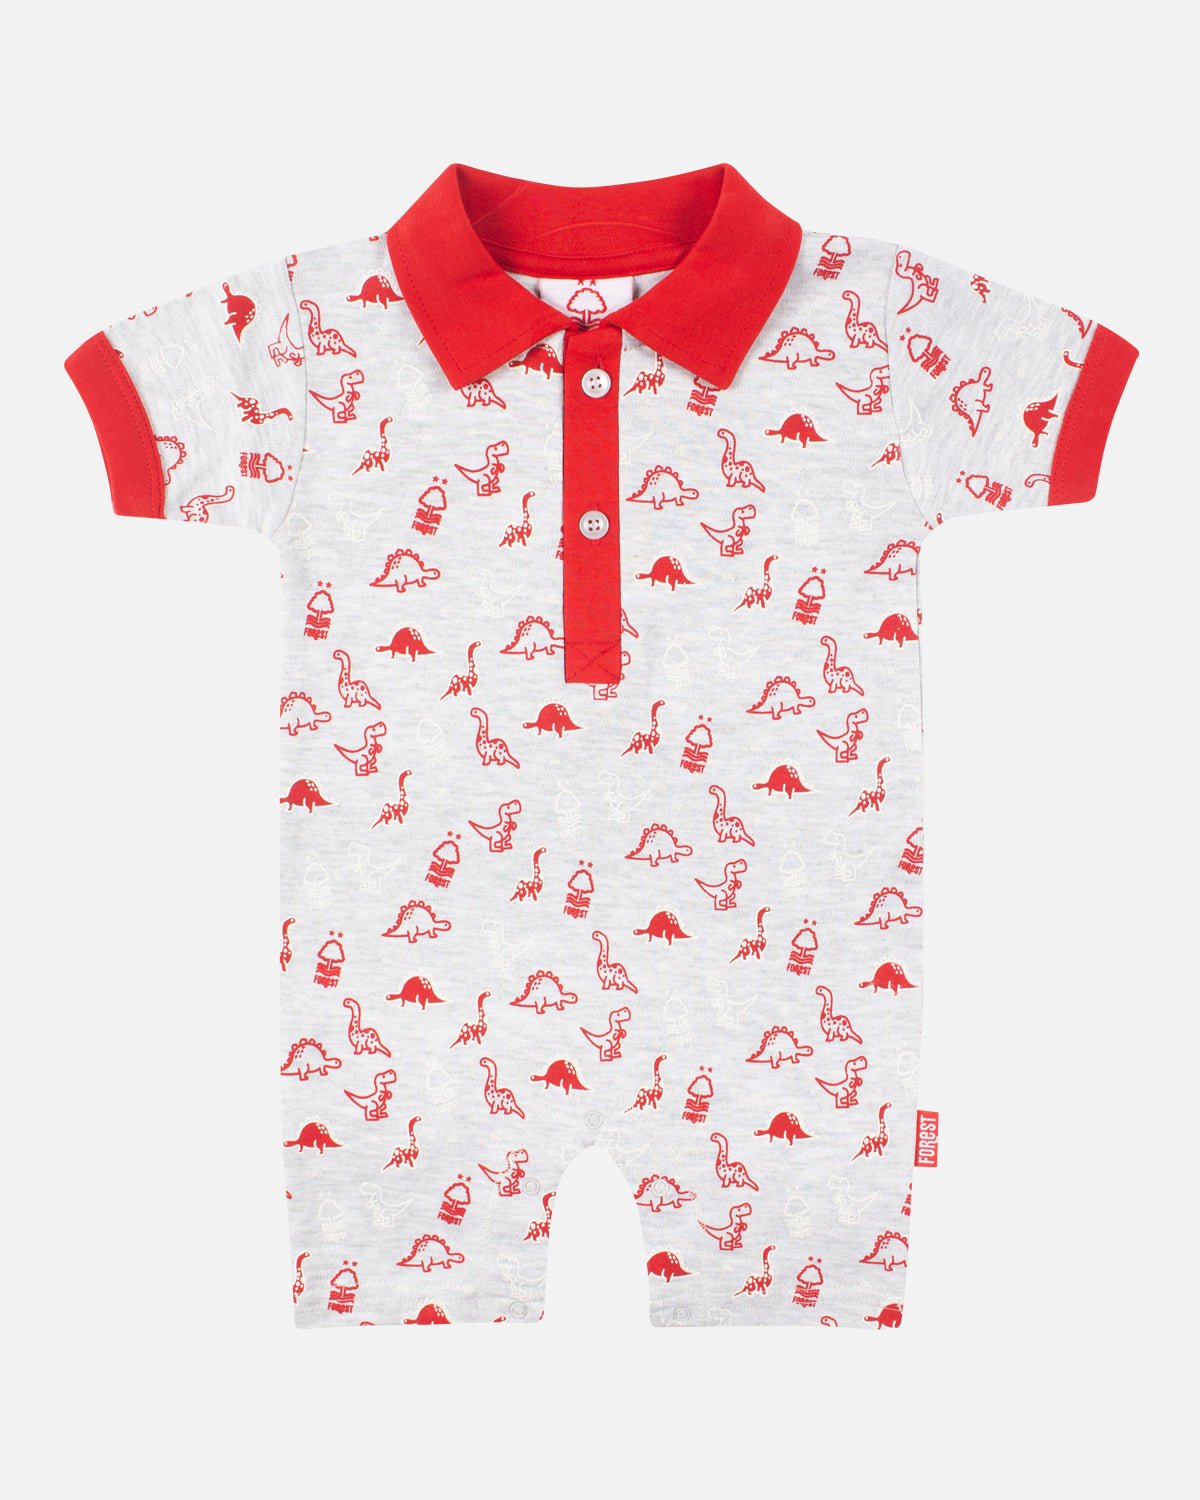 NFFC Dino Baby Romper - Nottingham Forest FC